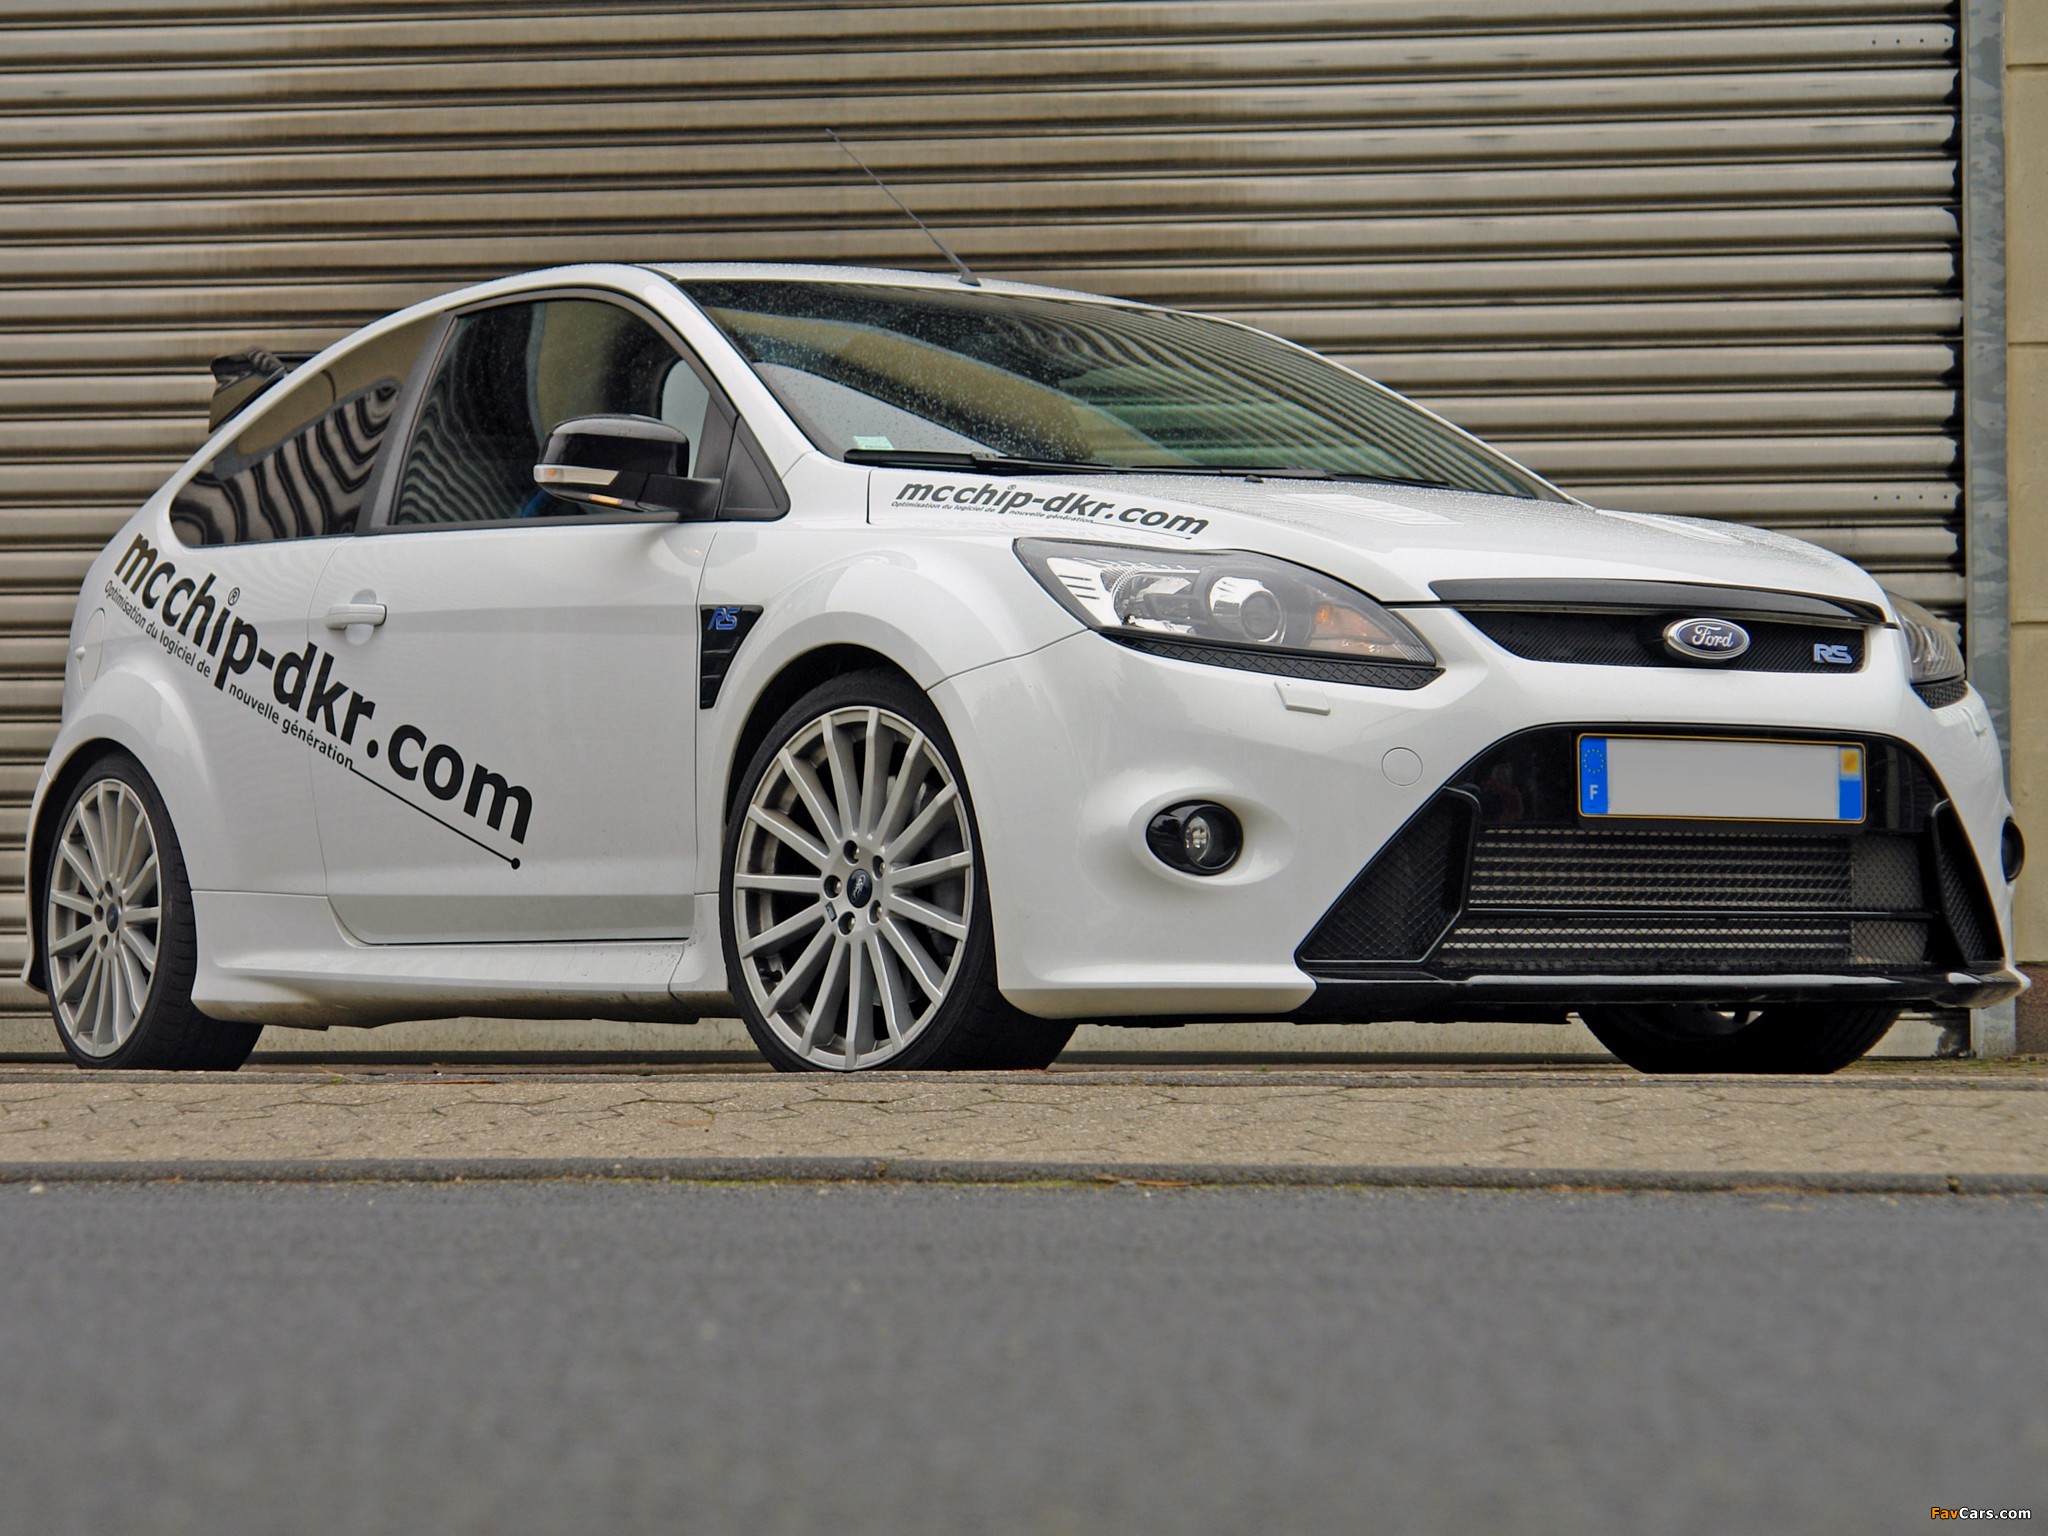 Images of Mcchip-DKR Ford Focus RS 2009 (2048 x 1536)